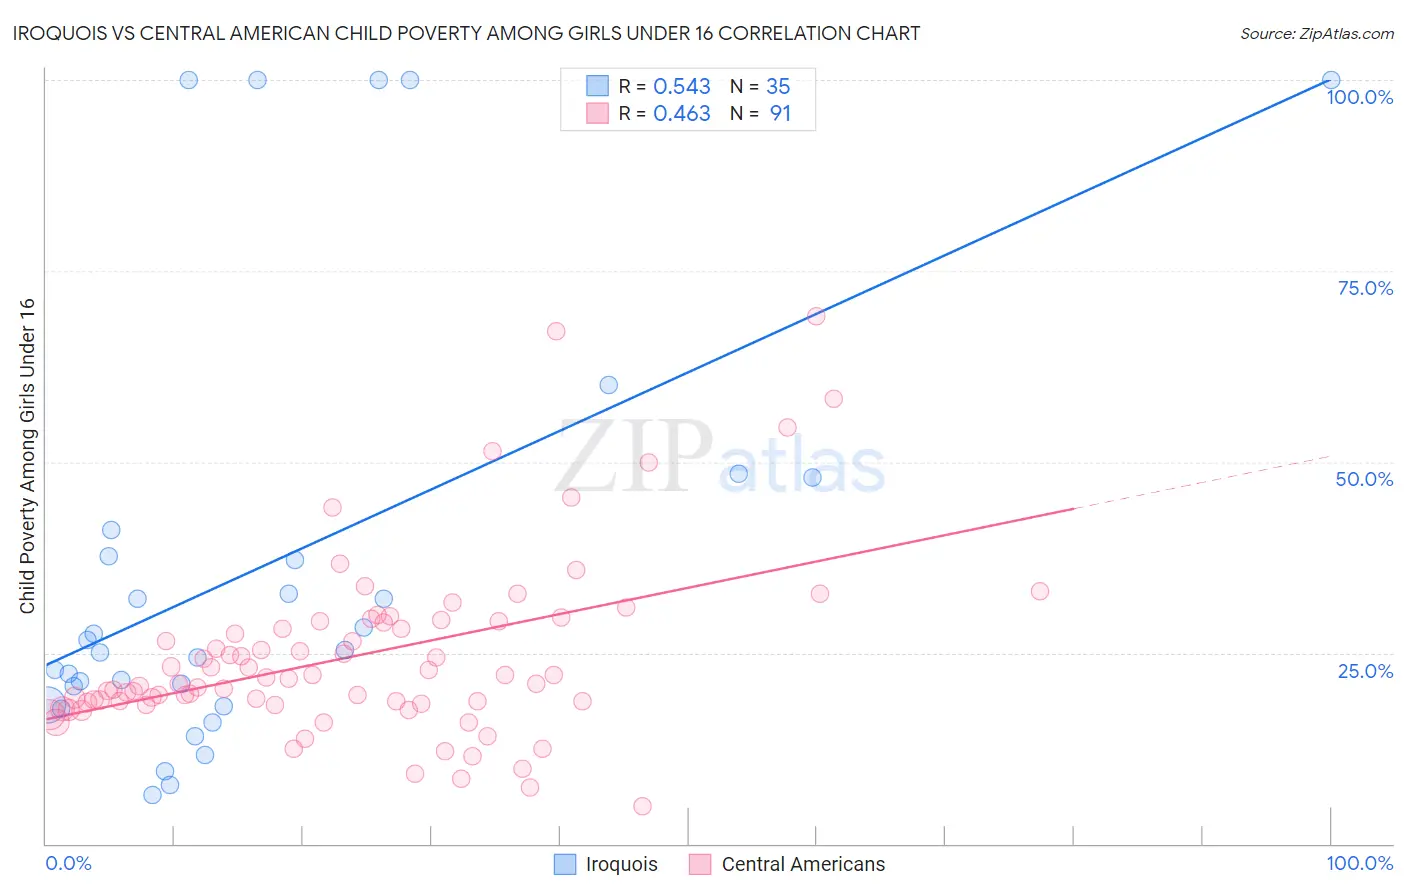 Iroquois vs Central American Child Poverty Among Girls Under 16